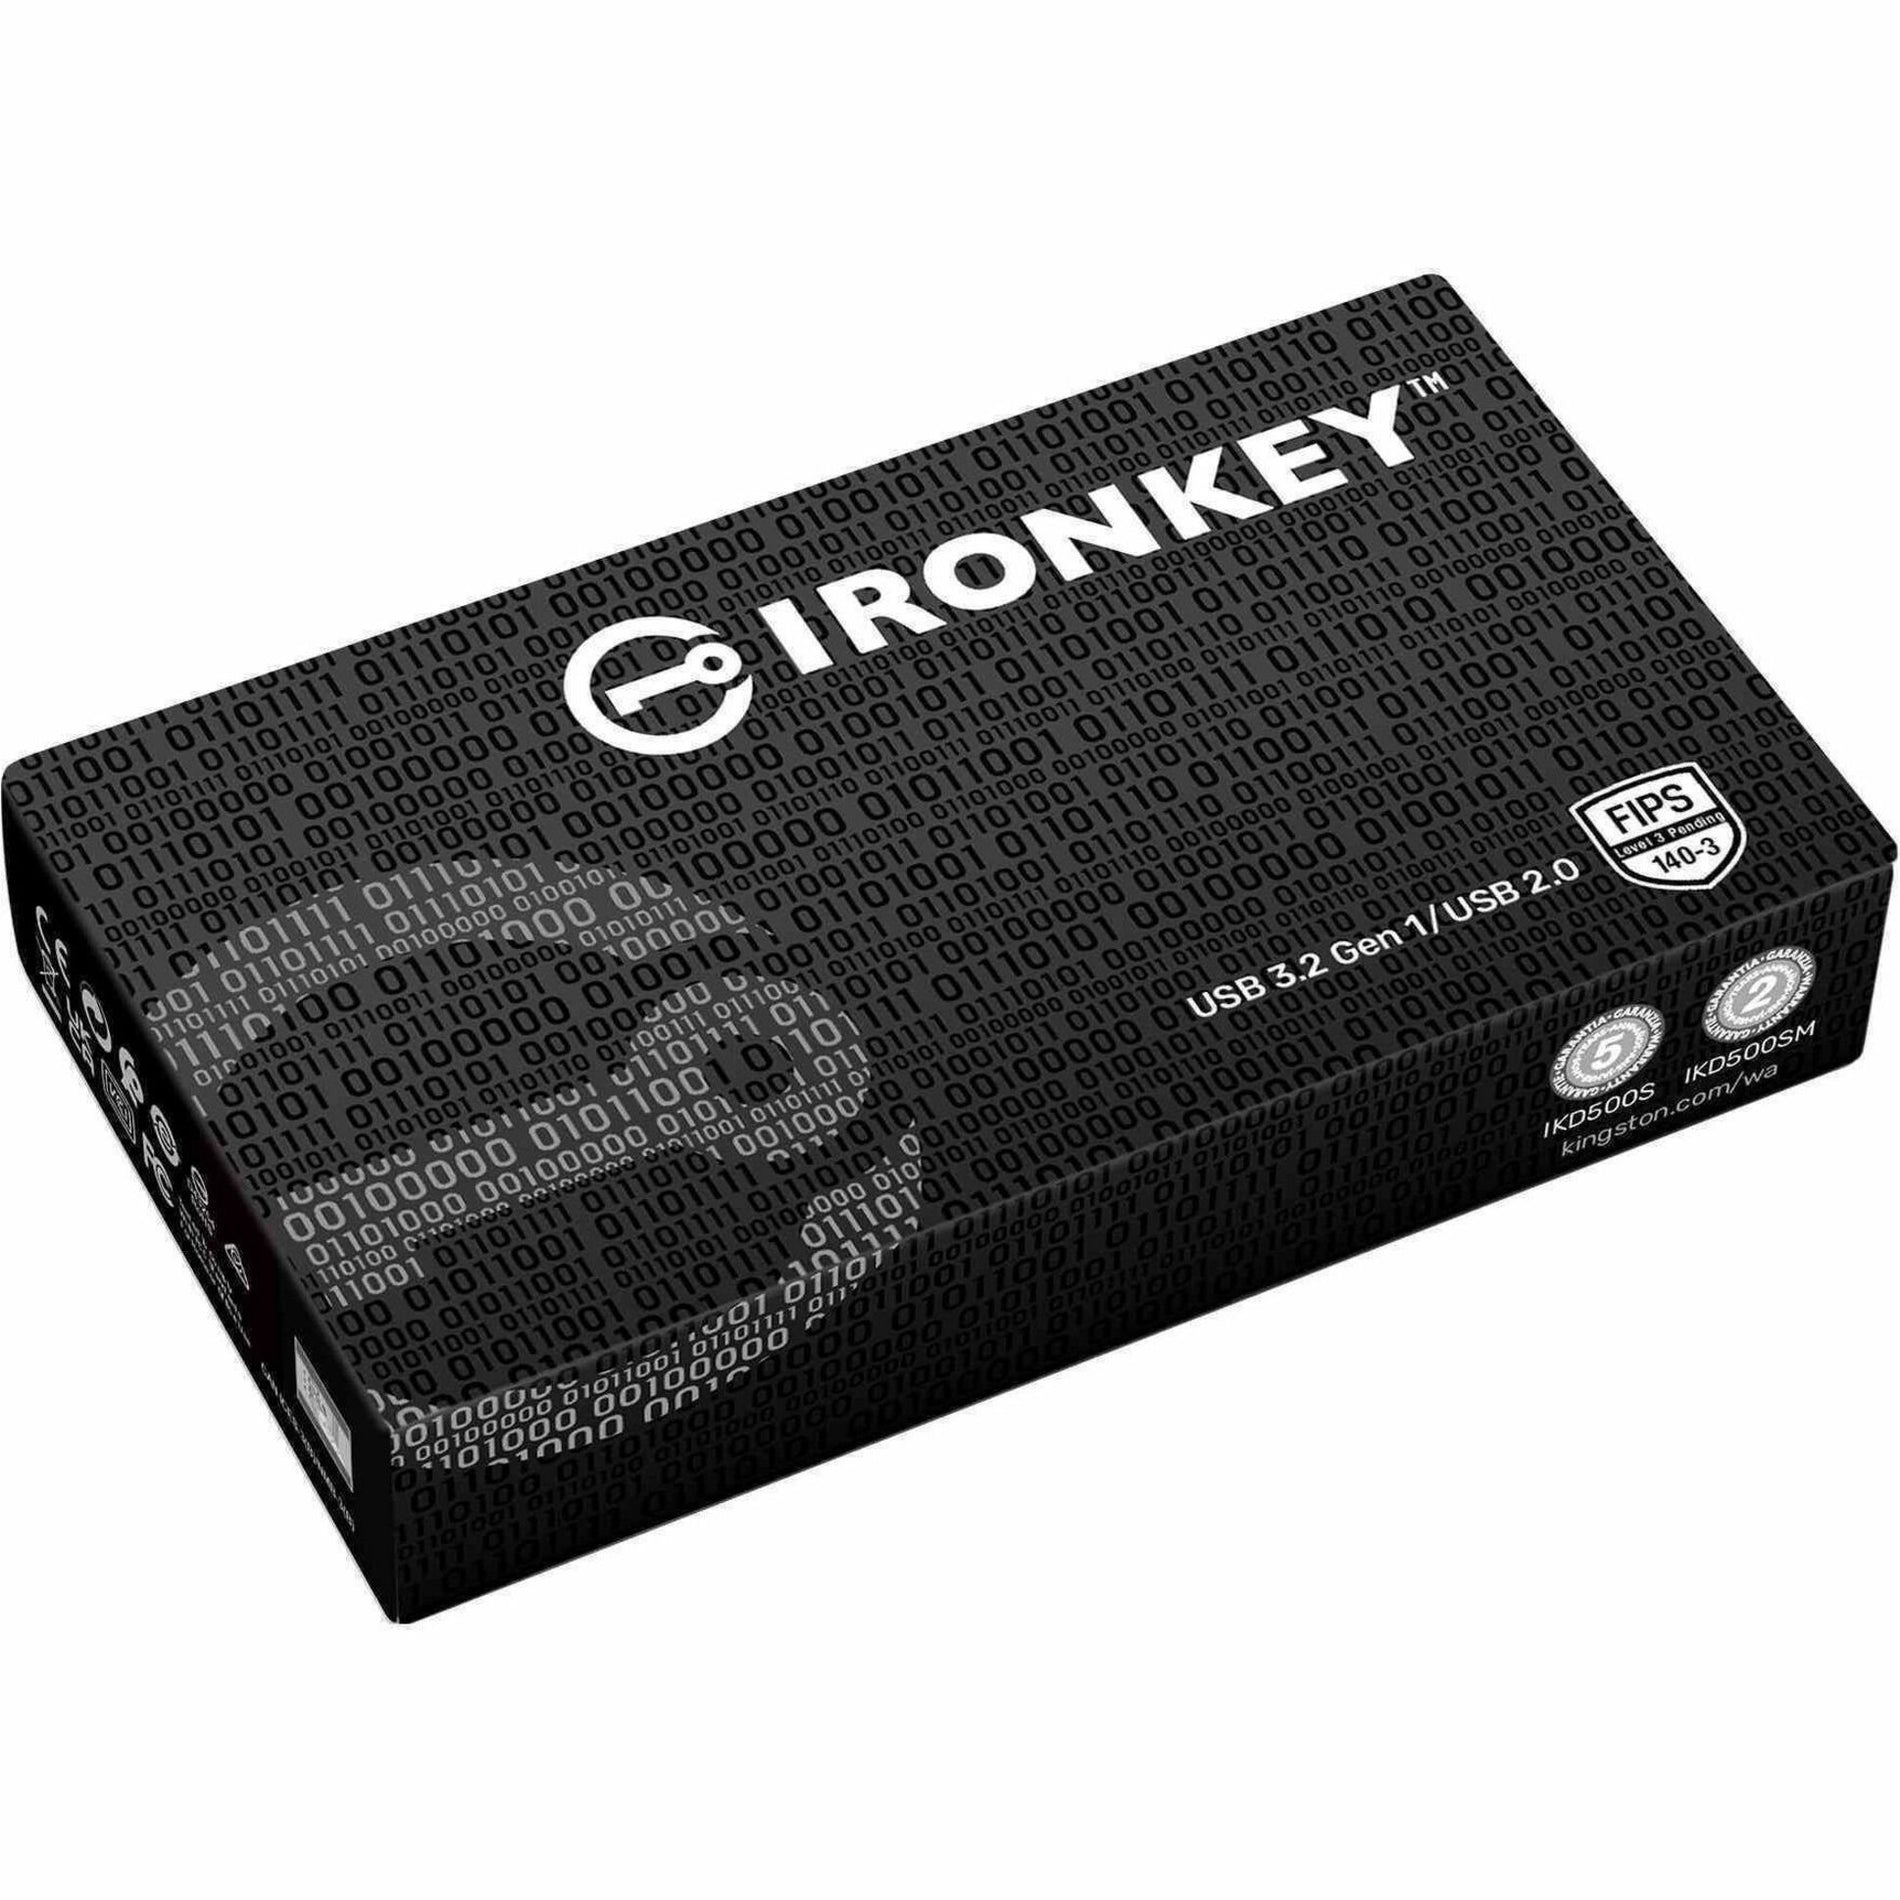 IronKey IKD500SM/128GB D500SM 128GB USB 3.2 (Gen 1) Type A Flash Drive, Rugged, Password Protection, Water Proof